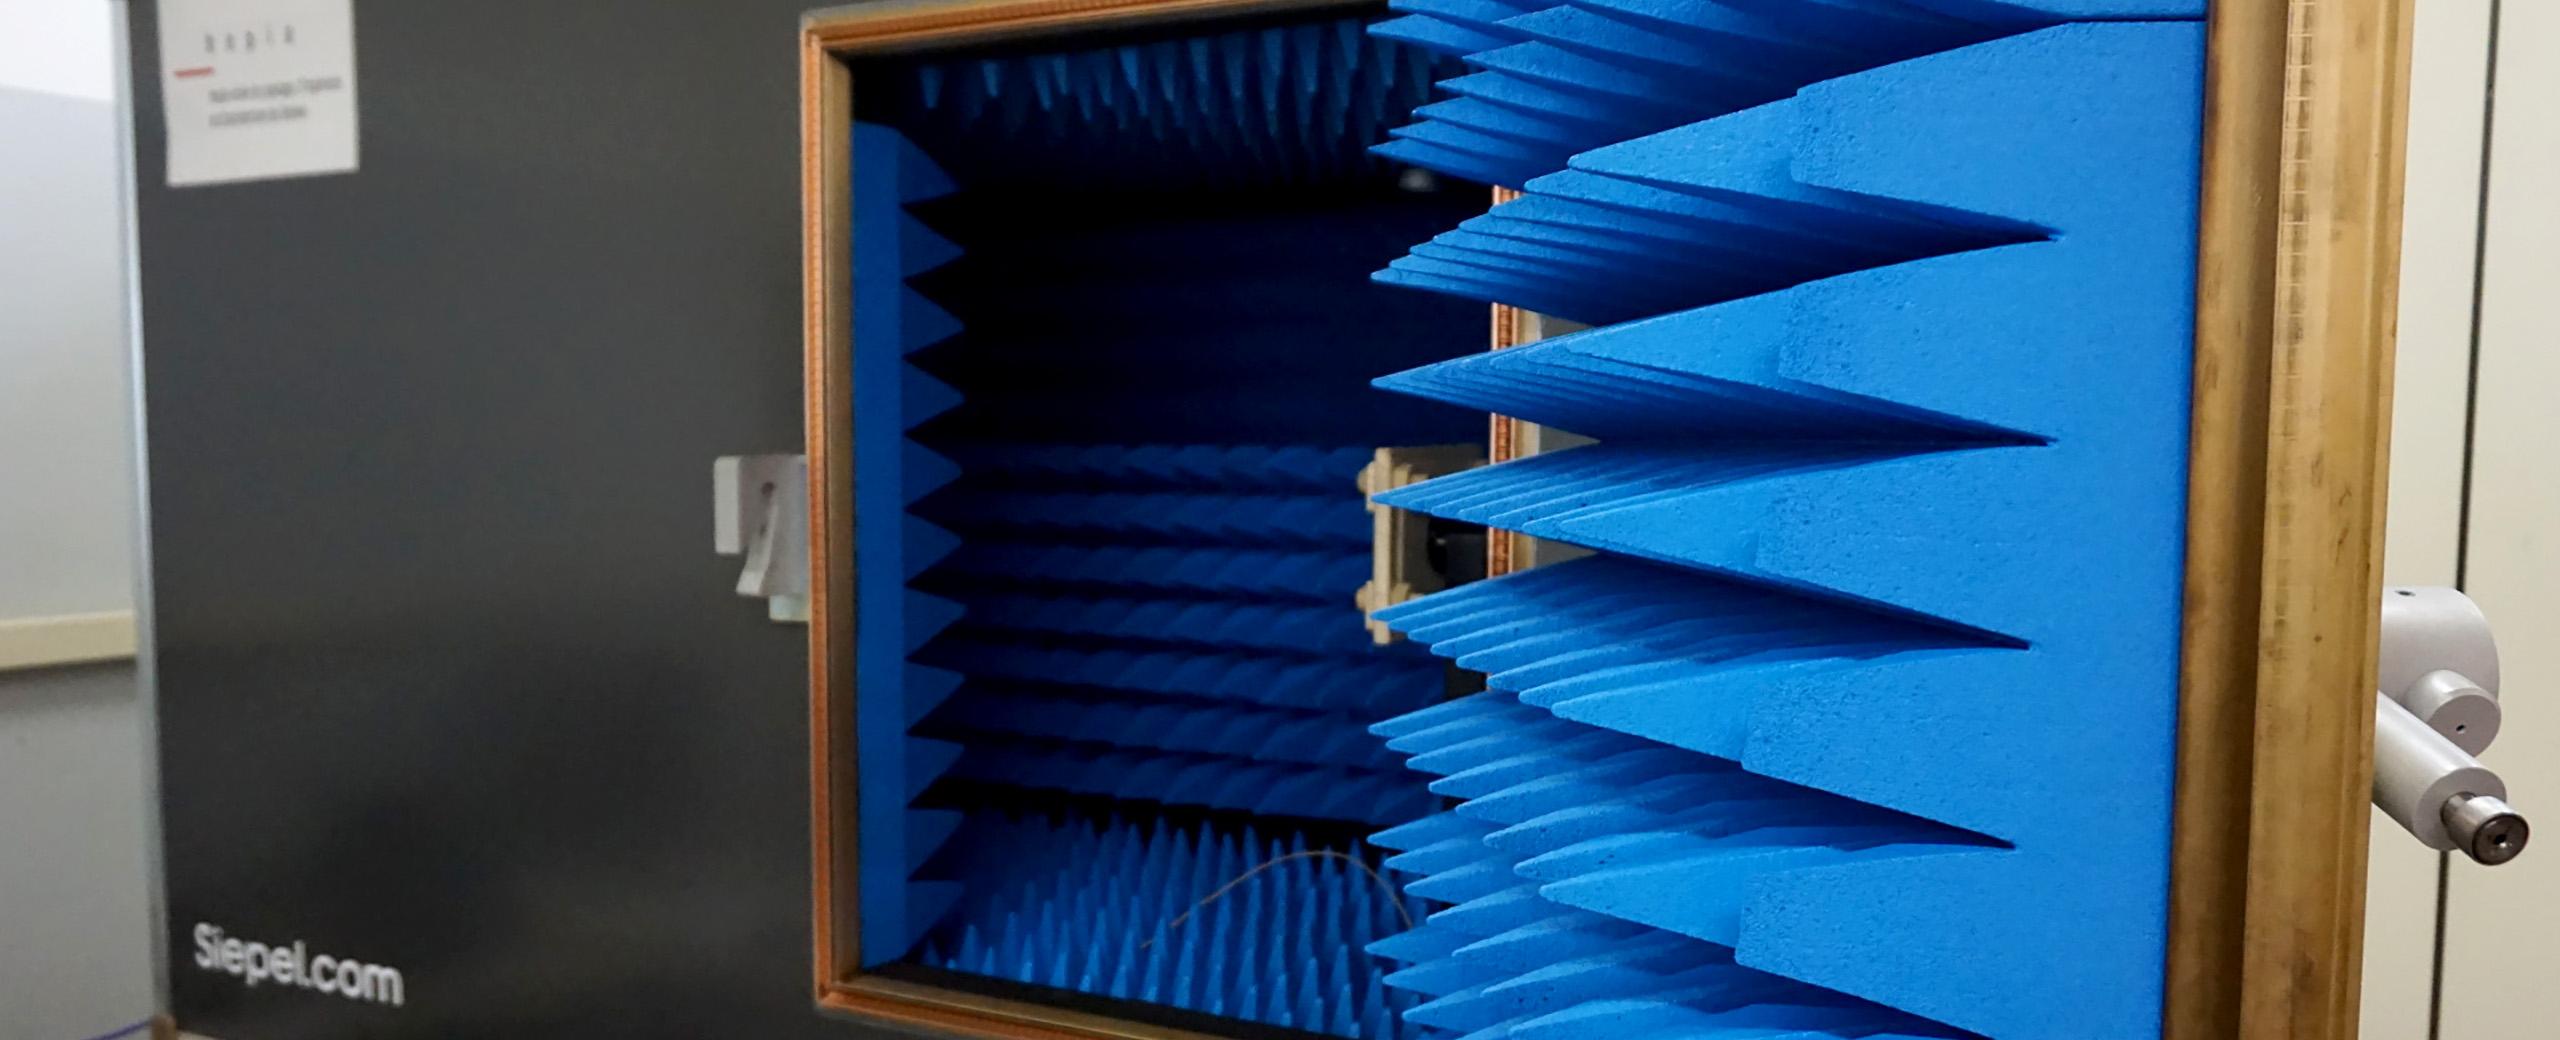 Measurements in an anechoic chamber